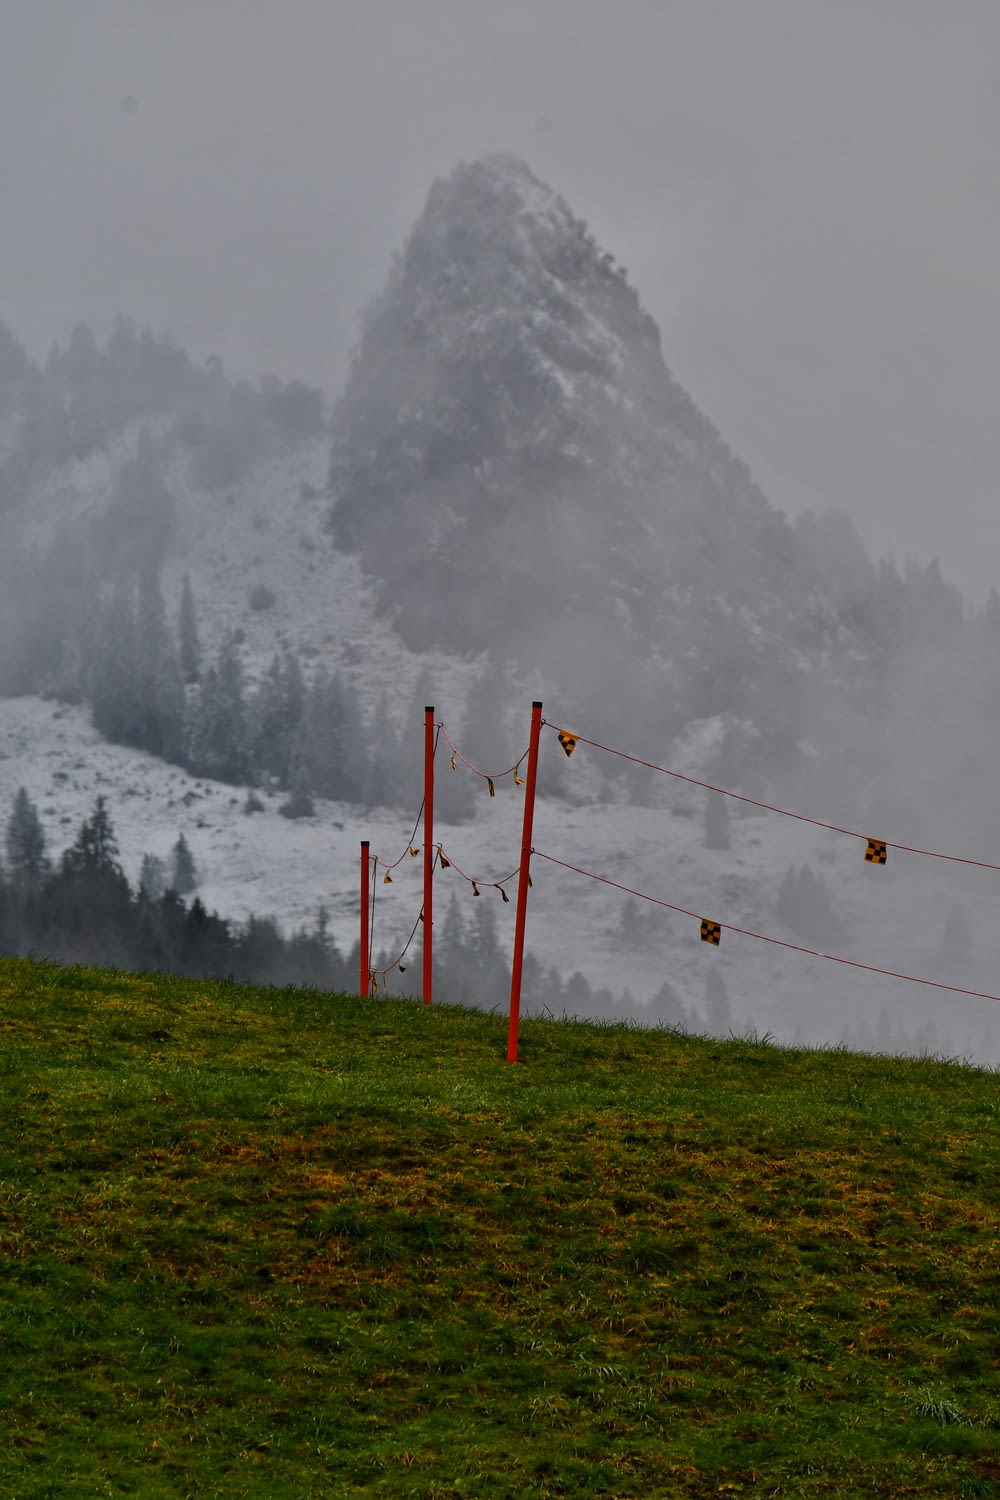 a foggy mountain with a red fence in the foreground